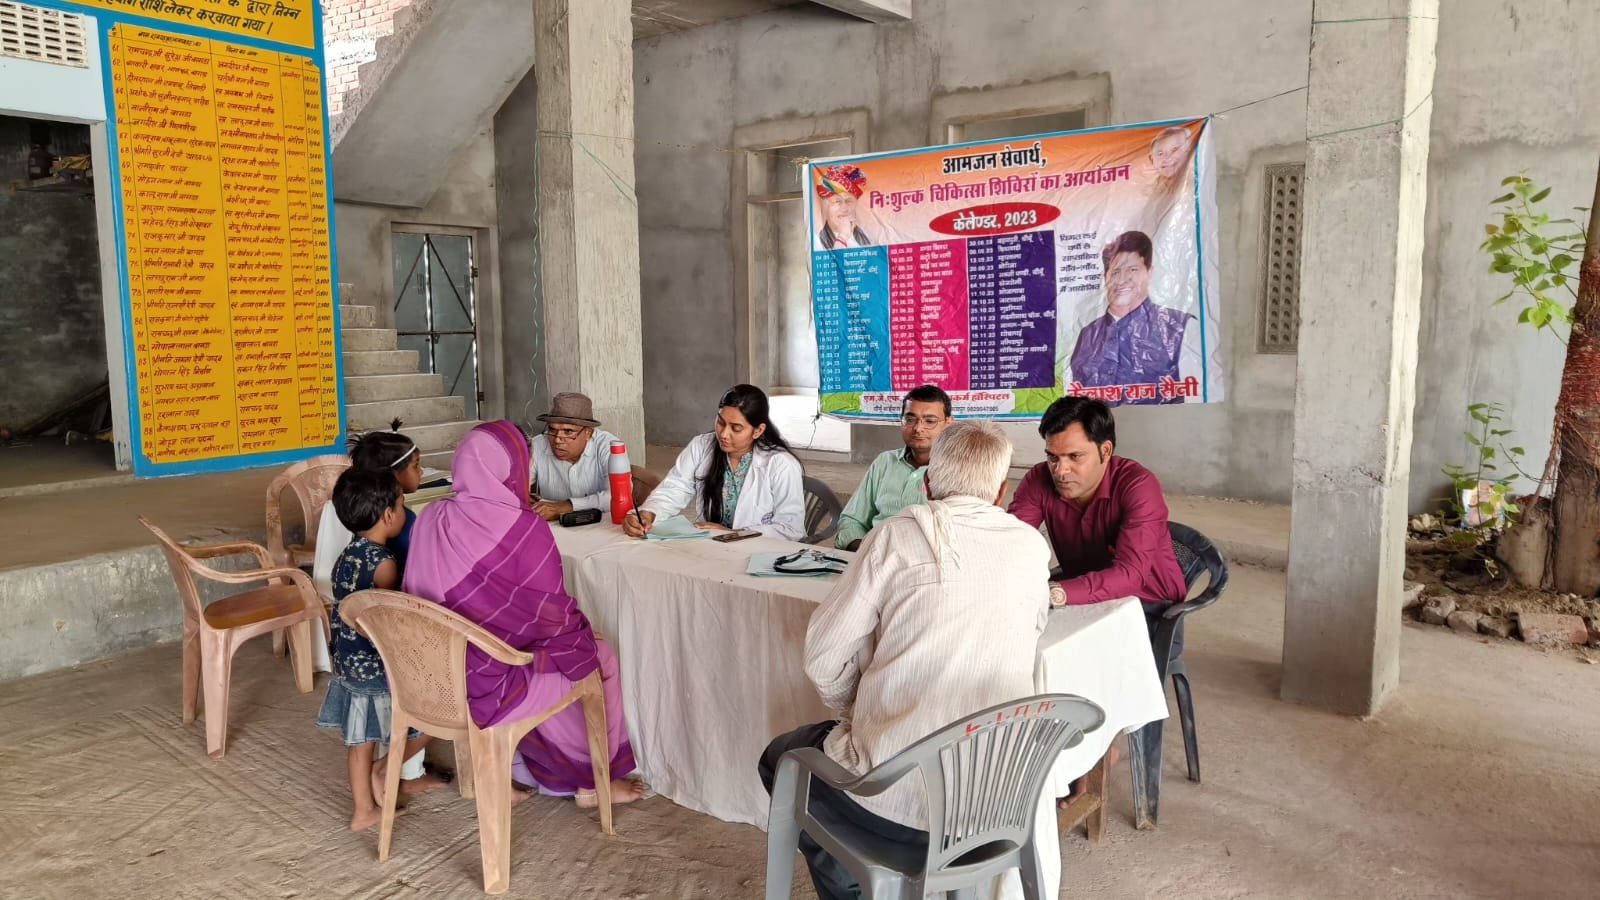 WEEKLY FREE MEDICAL CAMP ORGANIZED AT VILLAGE ALEESAR, CHOMU ON DATED 19 APRIL 2023 PER SCHEDULE